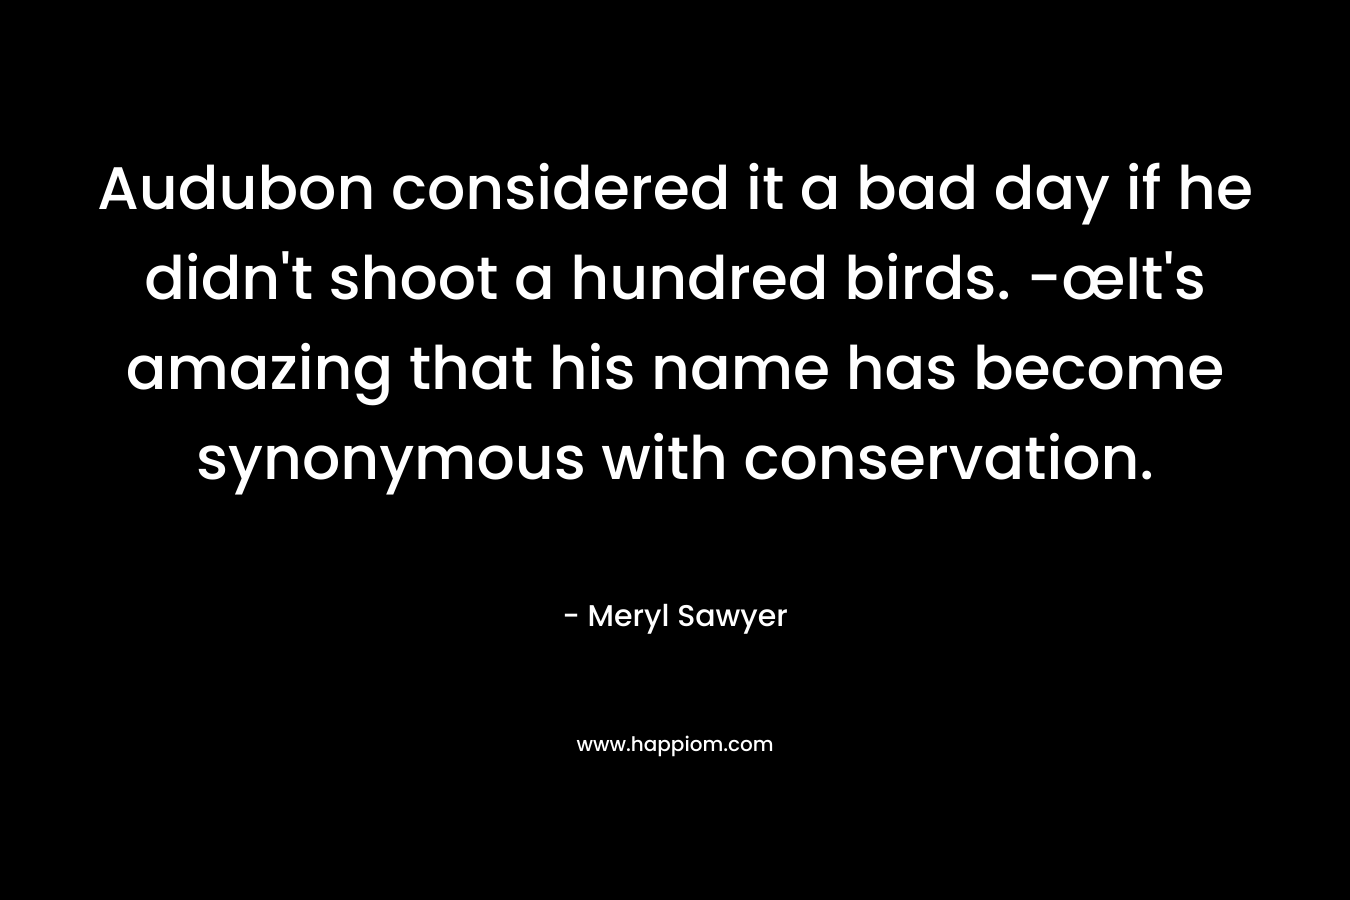 Audubon considered it a bad day if he didn’t shoot a hundred birds. -œIt’s amazing that his name has become synonymous with conservation. – Meryl Sawyer